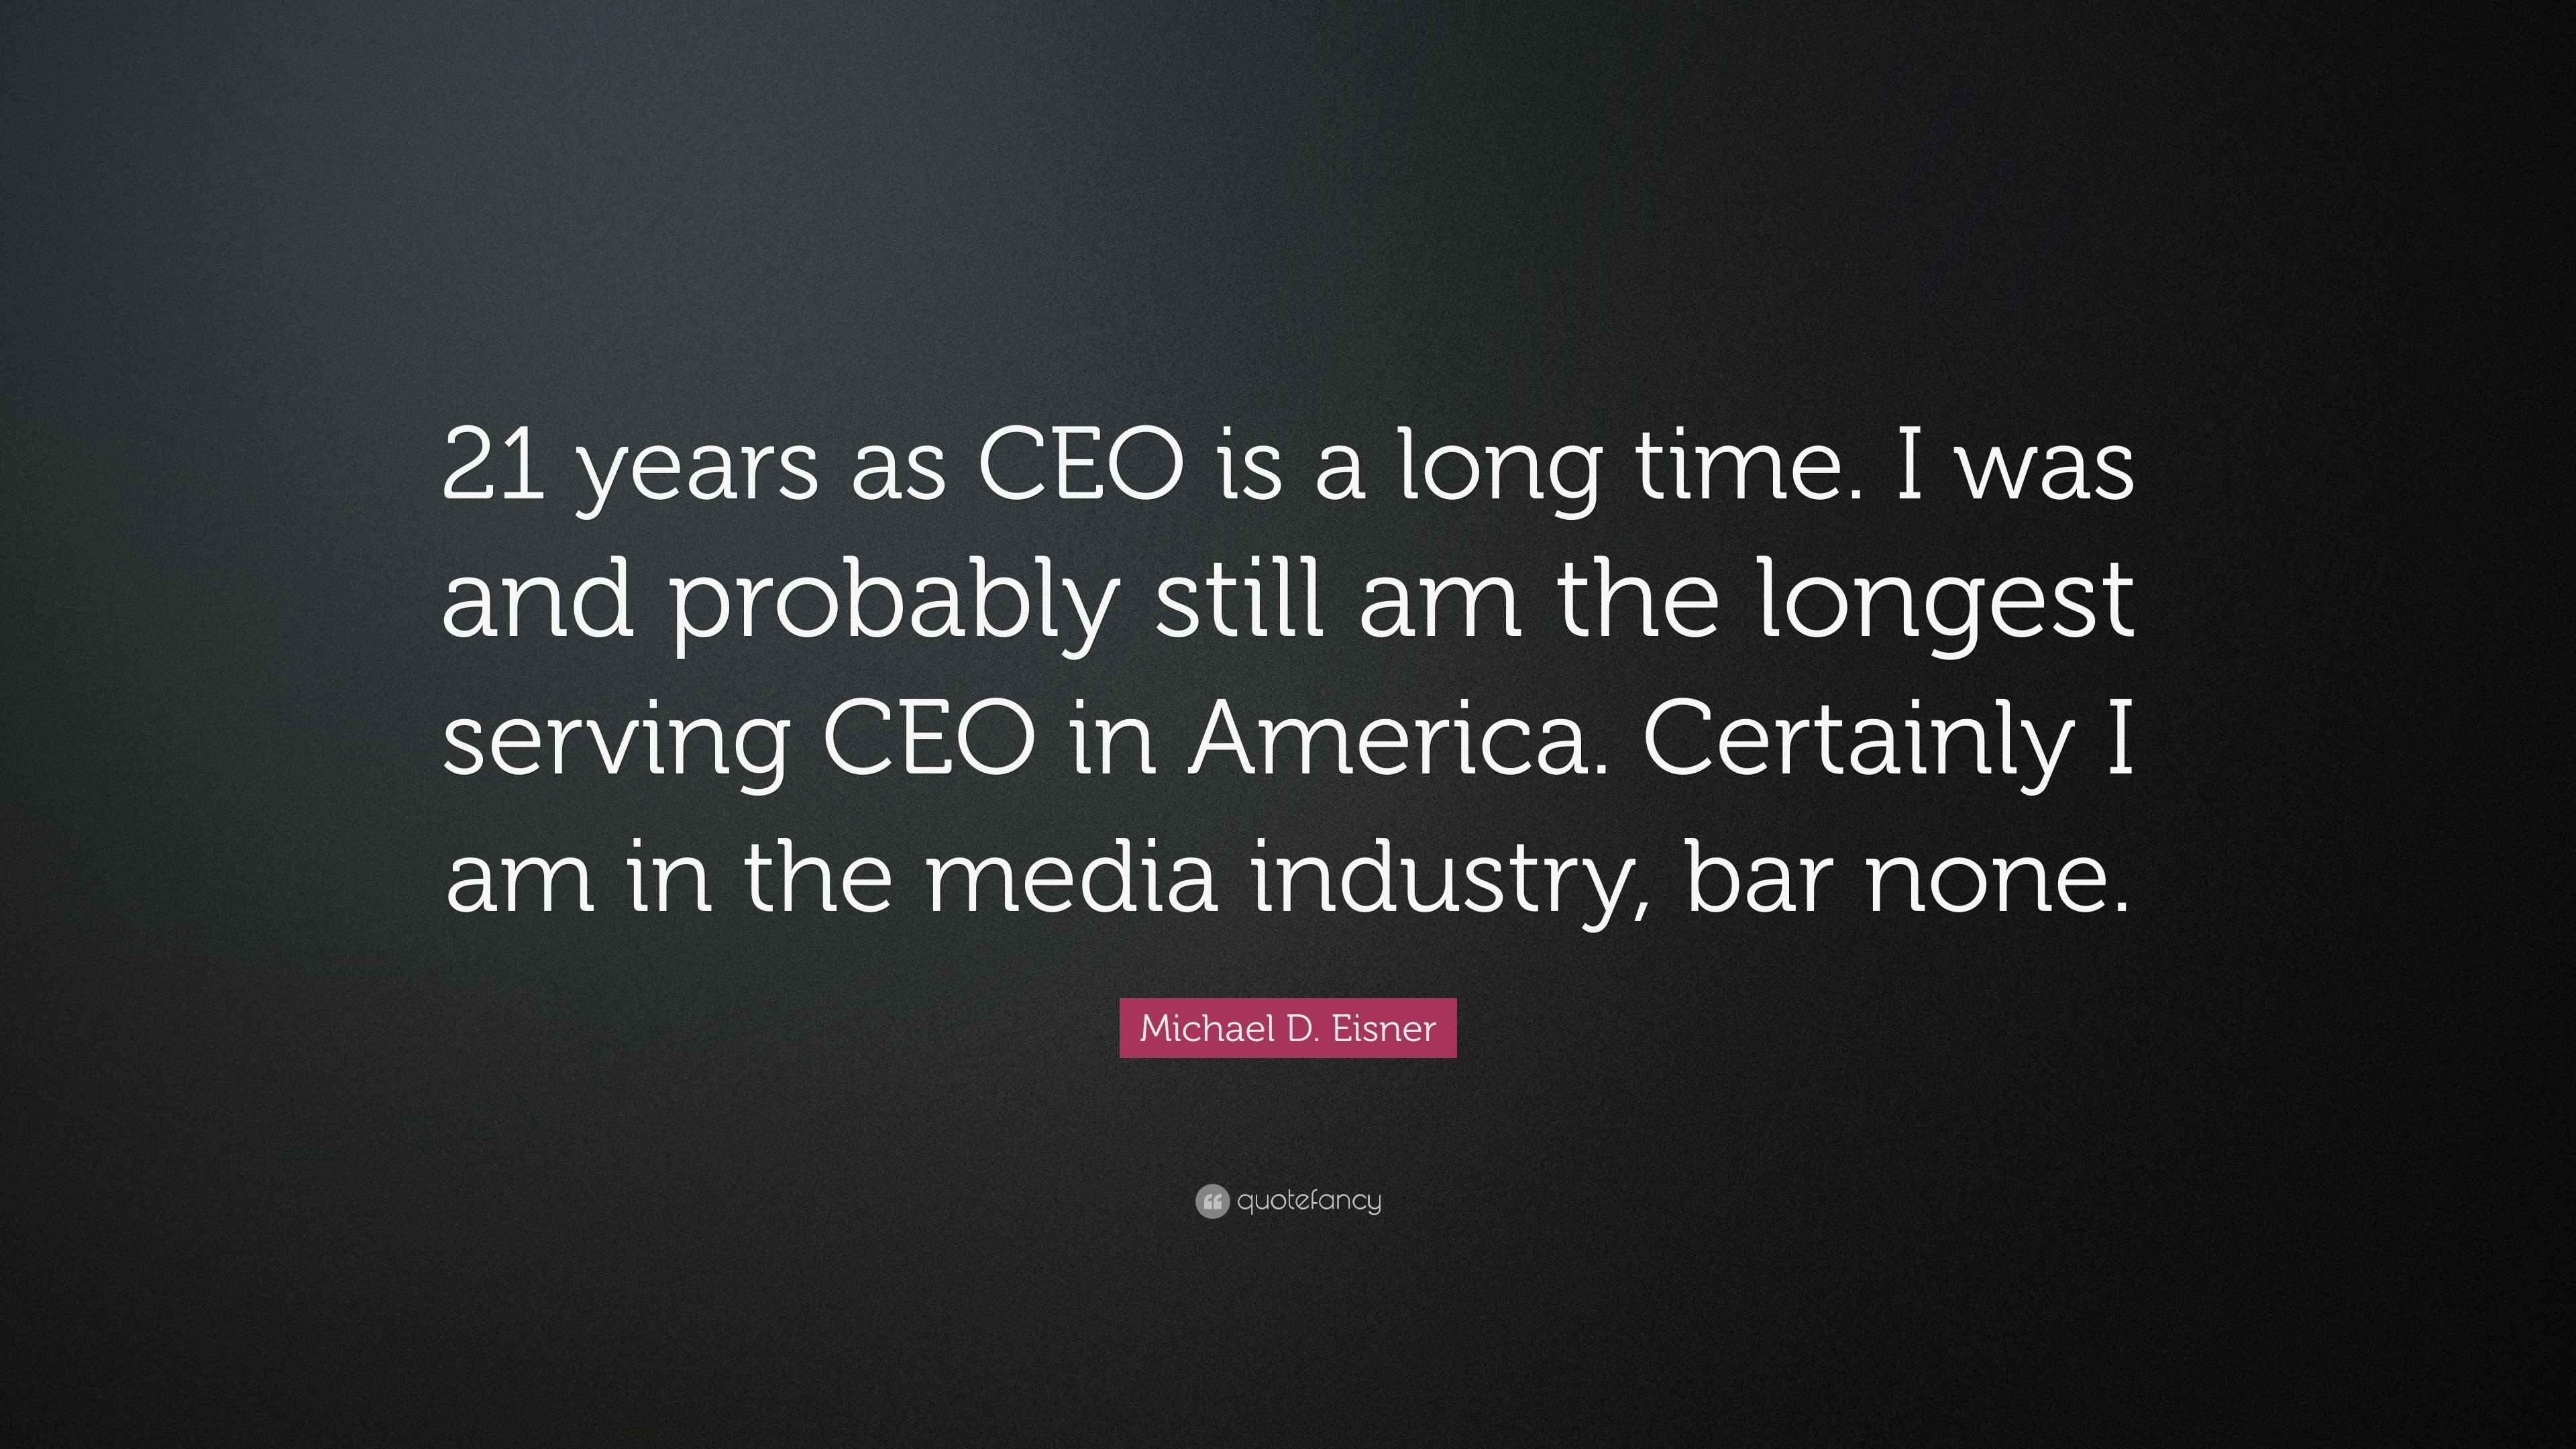 Michael D. Eisner Quote: “21 years as CEO is a long time. I was and probably still am the longest serving CEO in America. Certainly I am in the me.” (7 wallpaper)